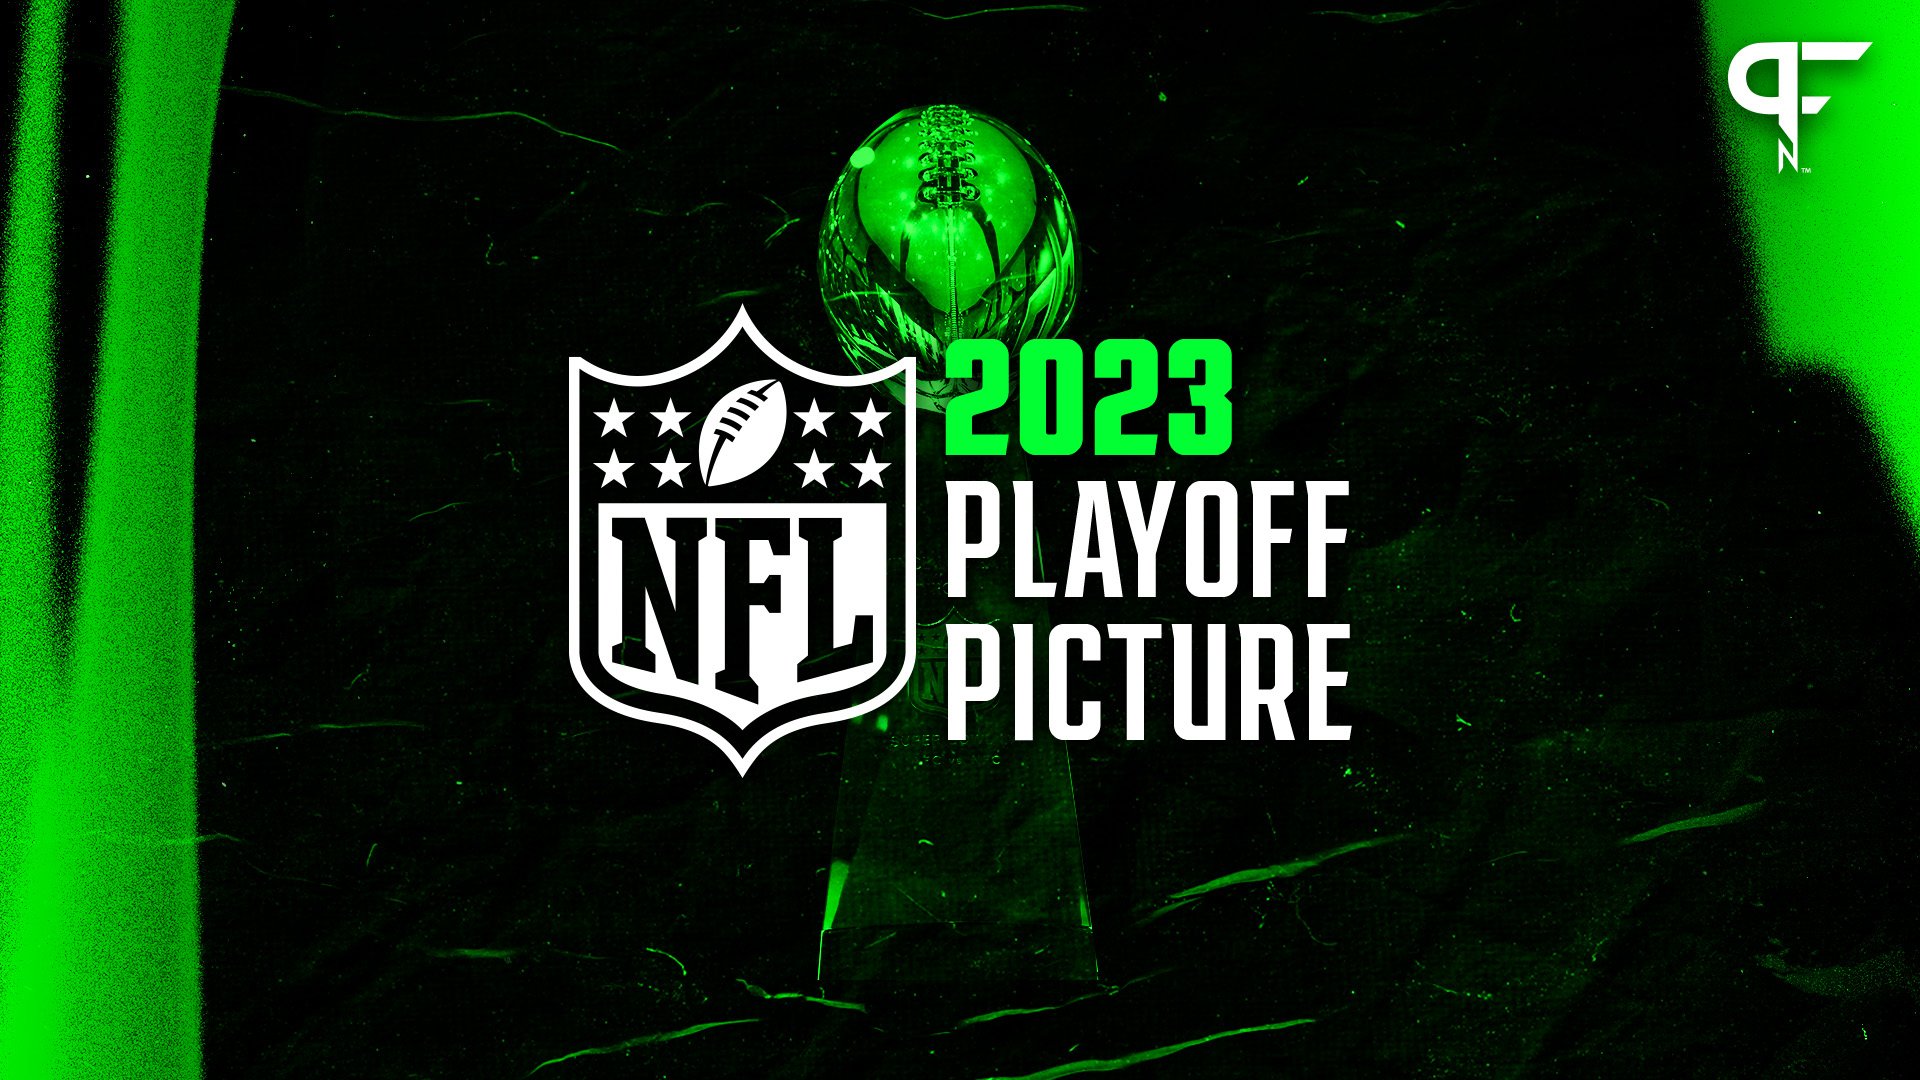 2023 NFL Playoff Picture graphic with NFL logo and the Lombardi trophy.